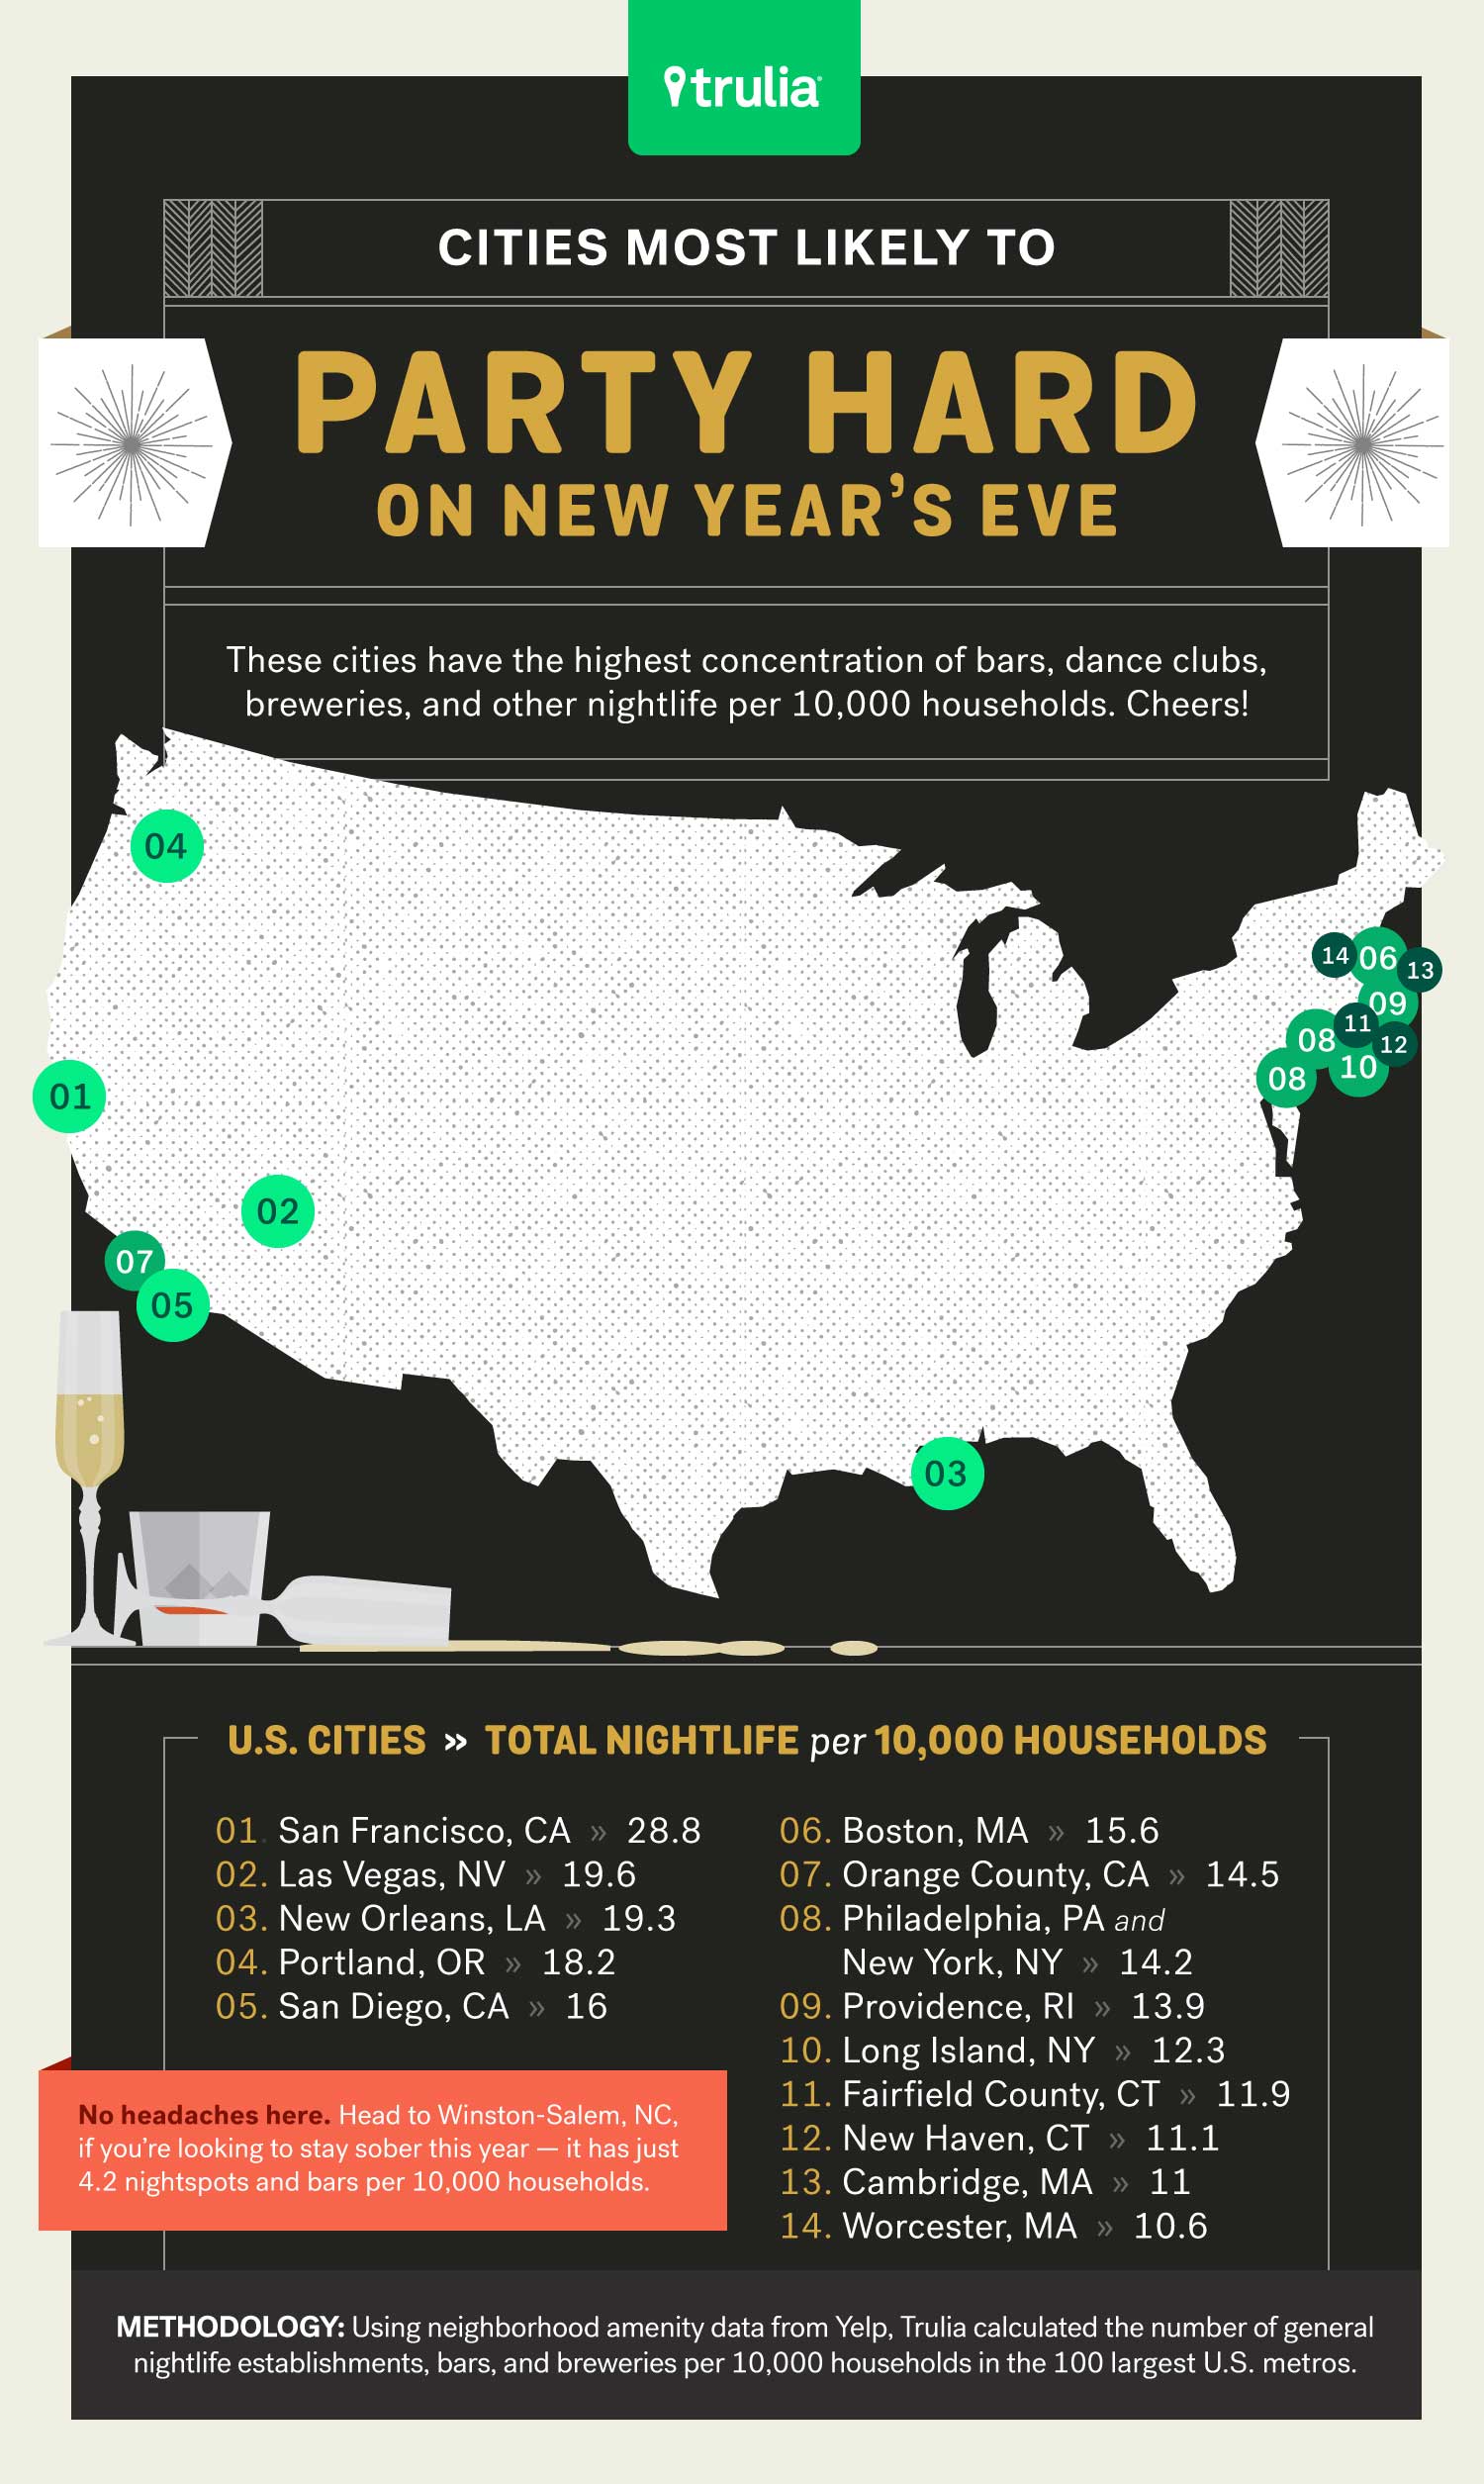 The most hungover cities on New Years